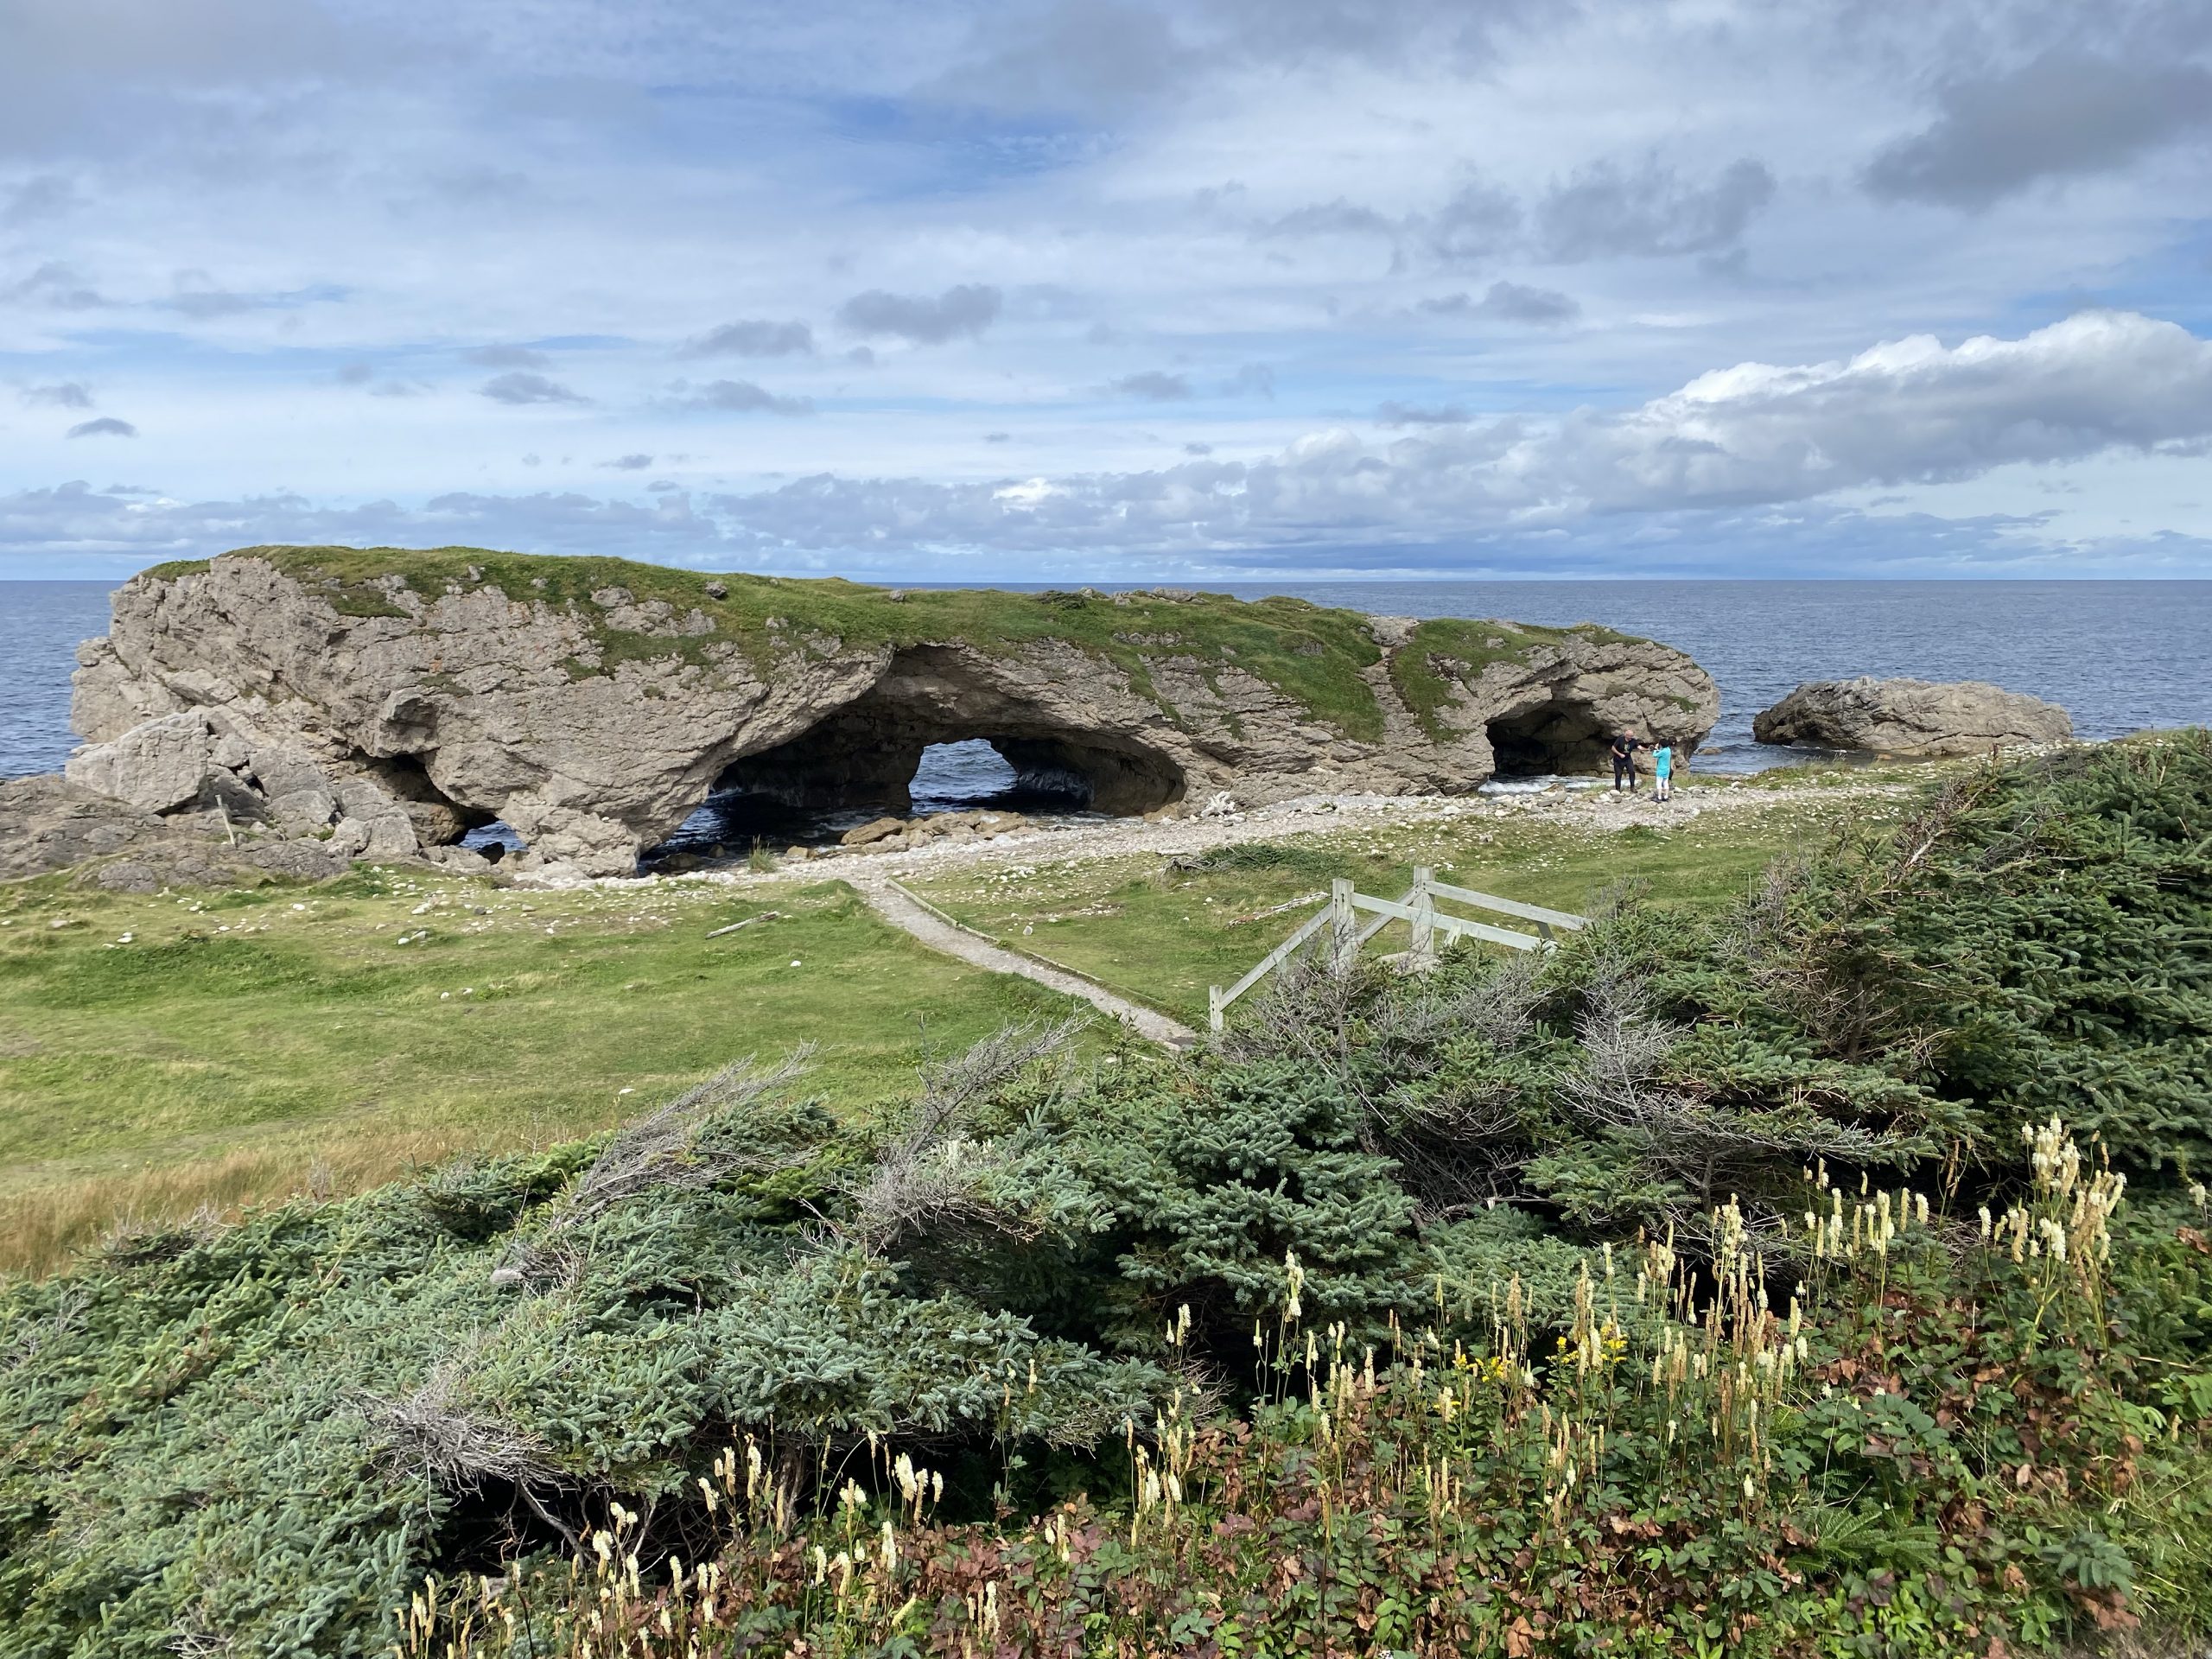 The main feature of Arches Provincial Park in Newfoundland. The arch to the left collapsed in 2008.